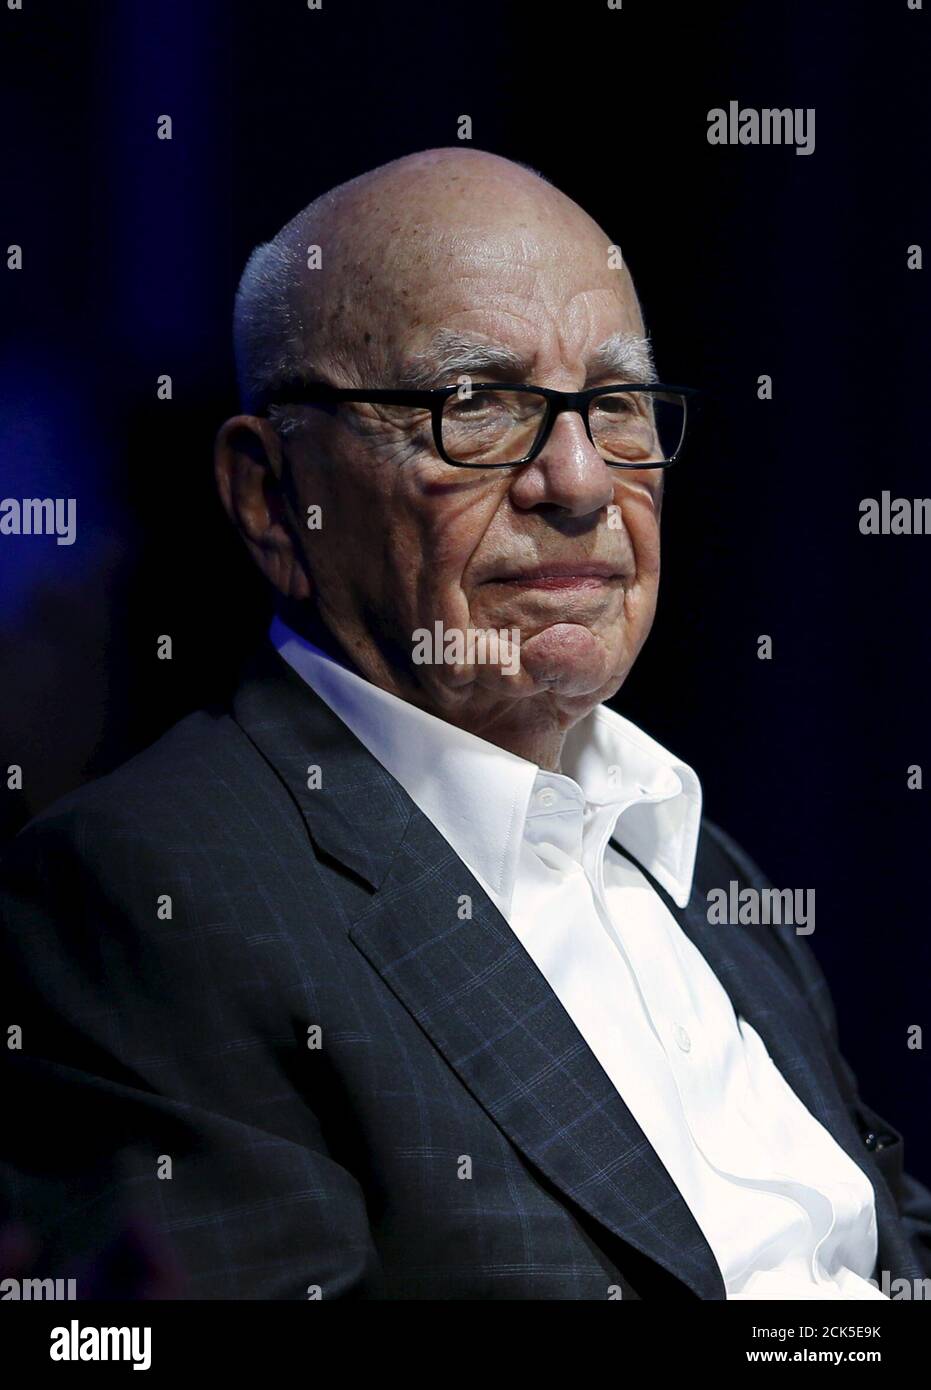 Rupert Murdoch, Executive Chairman of News Corp and 21st Century Fox, takes part as a judge during a global start up showcase at the Wall Street Journal Digital Live (WSJDLive) conference at the Montage hotel in Laguna Beach, California, October 20, 2015. REUTERS/Mike Blake Stock Photo